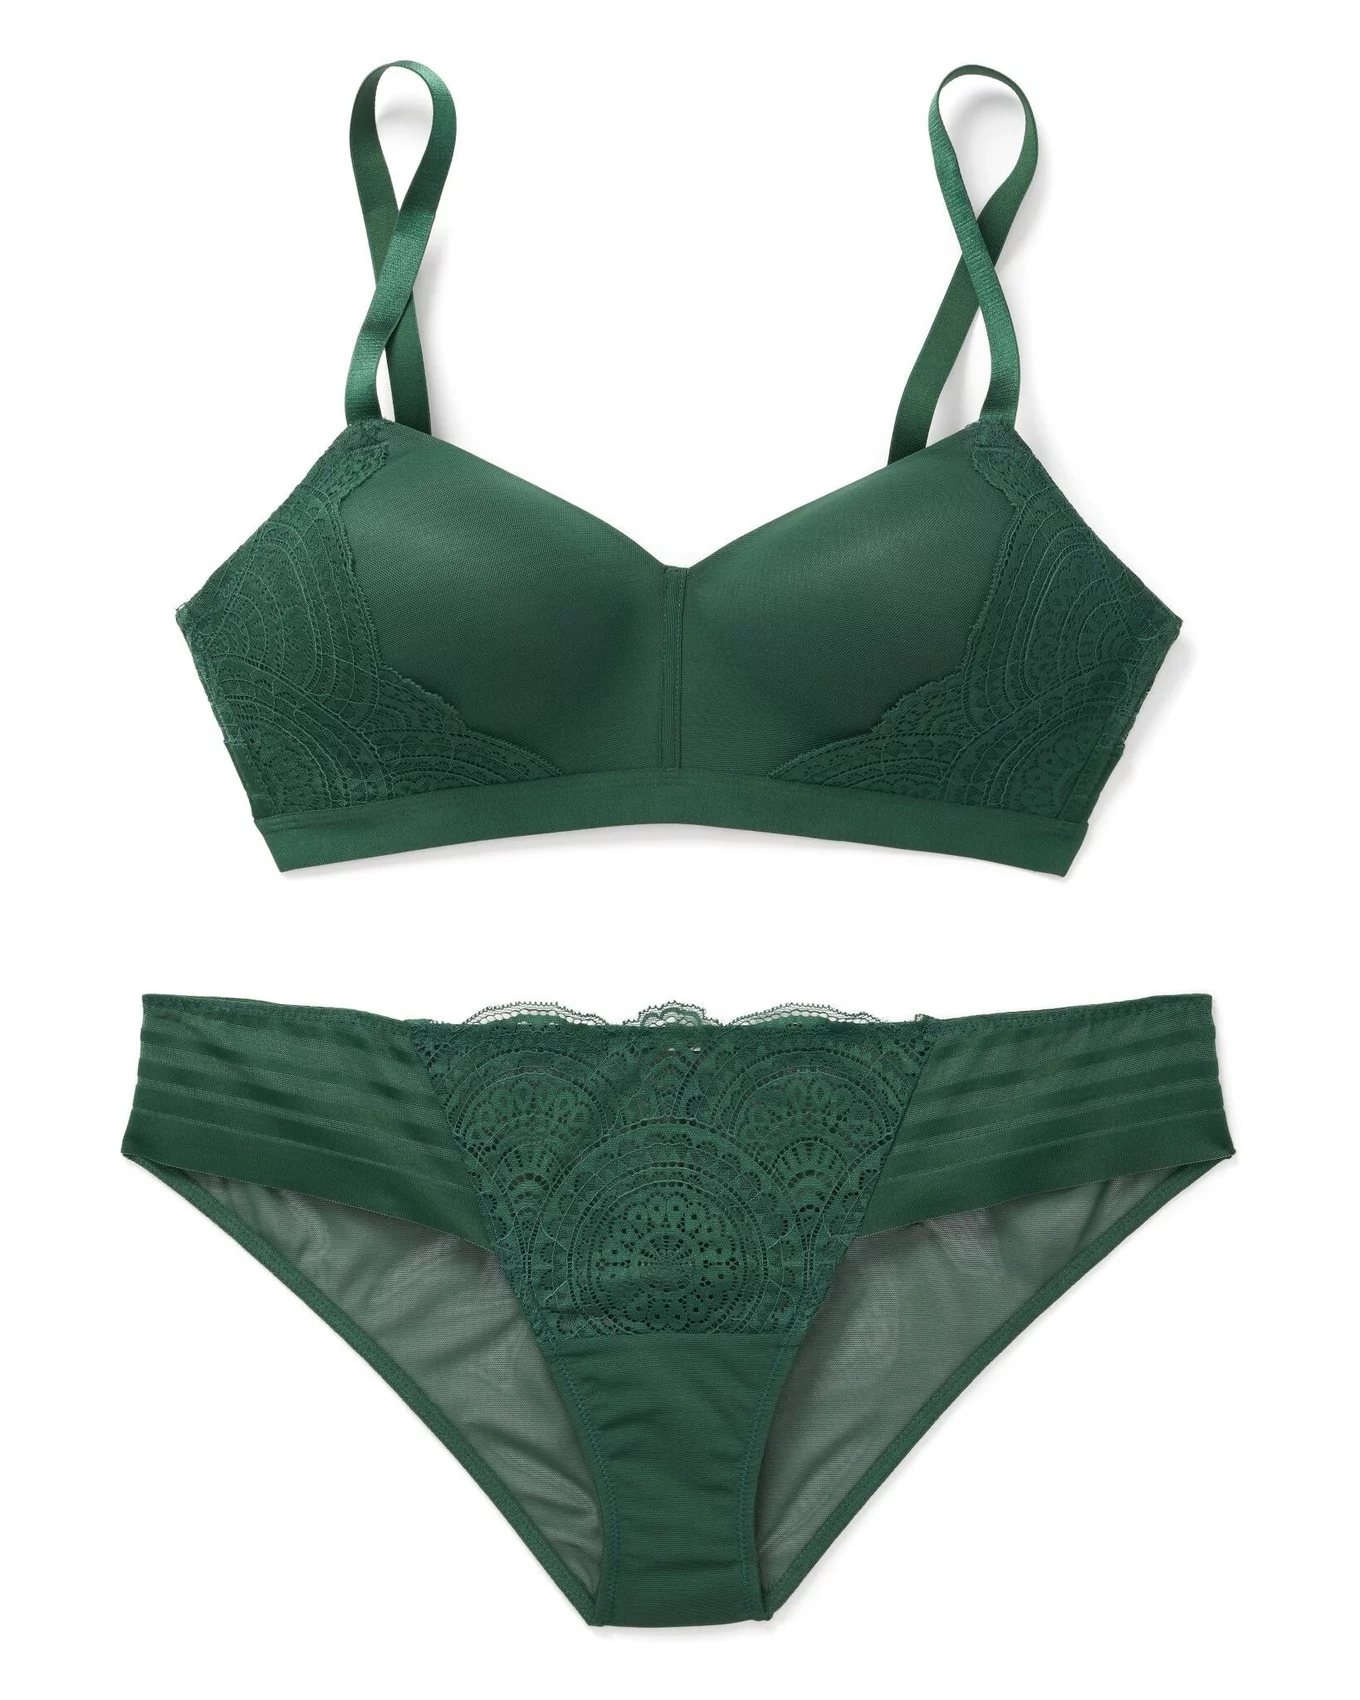 lacy hint: New Sheer Bra Styles in Green/Beige, Black and Red